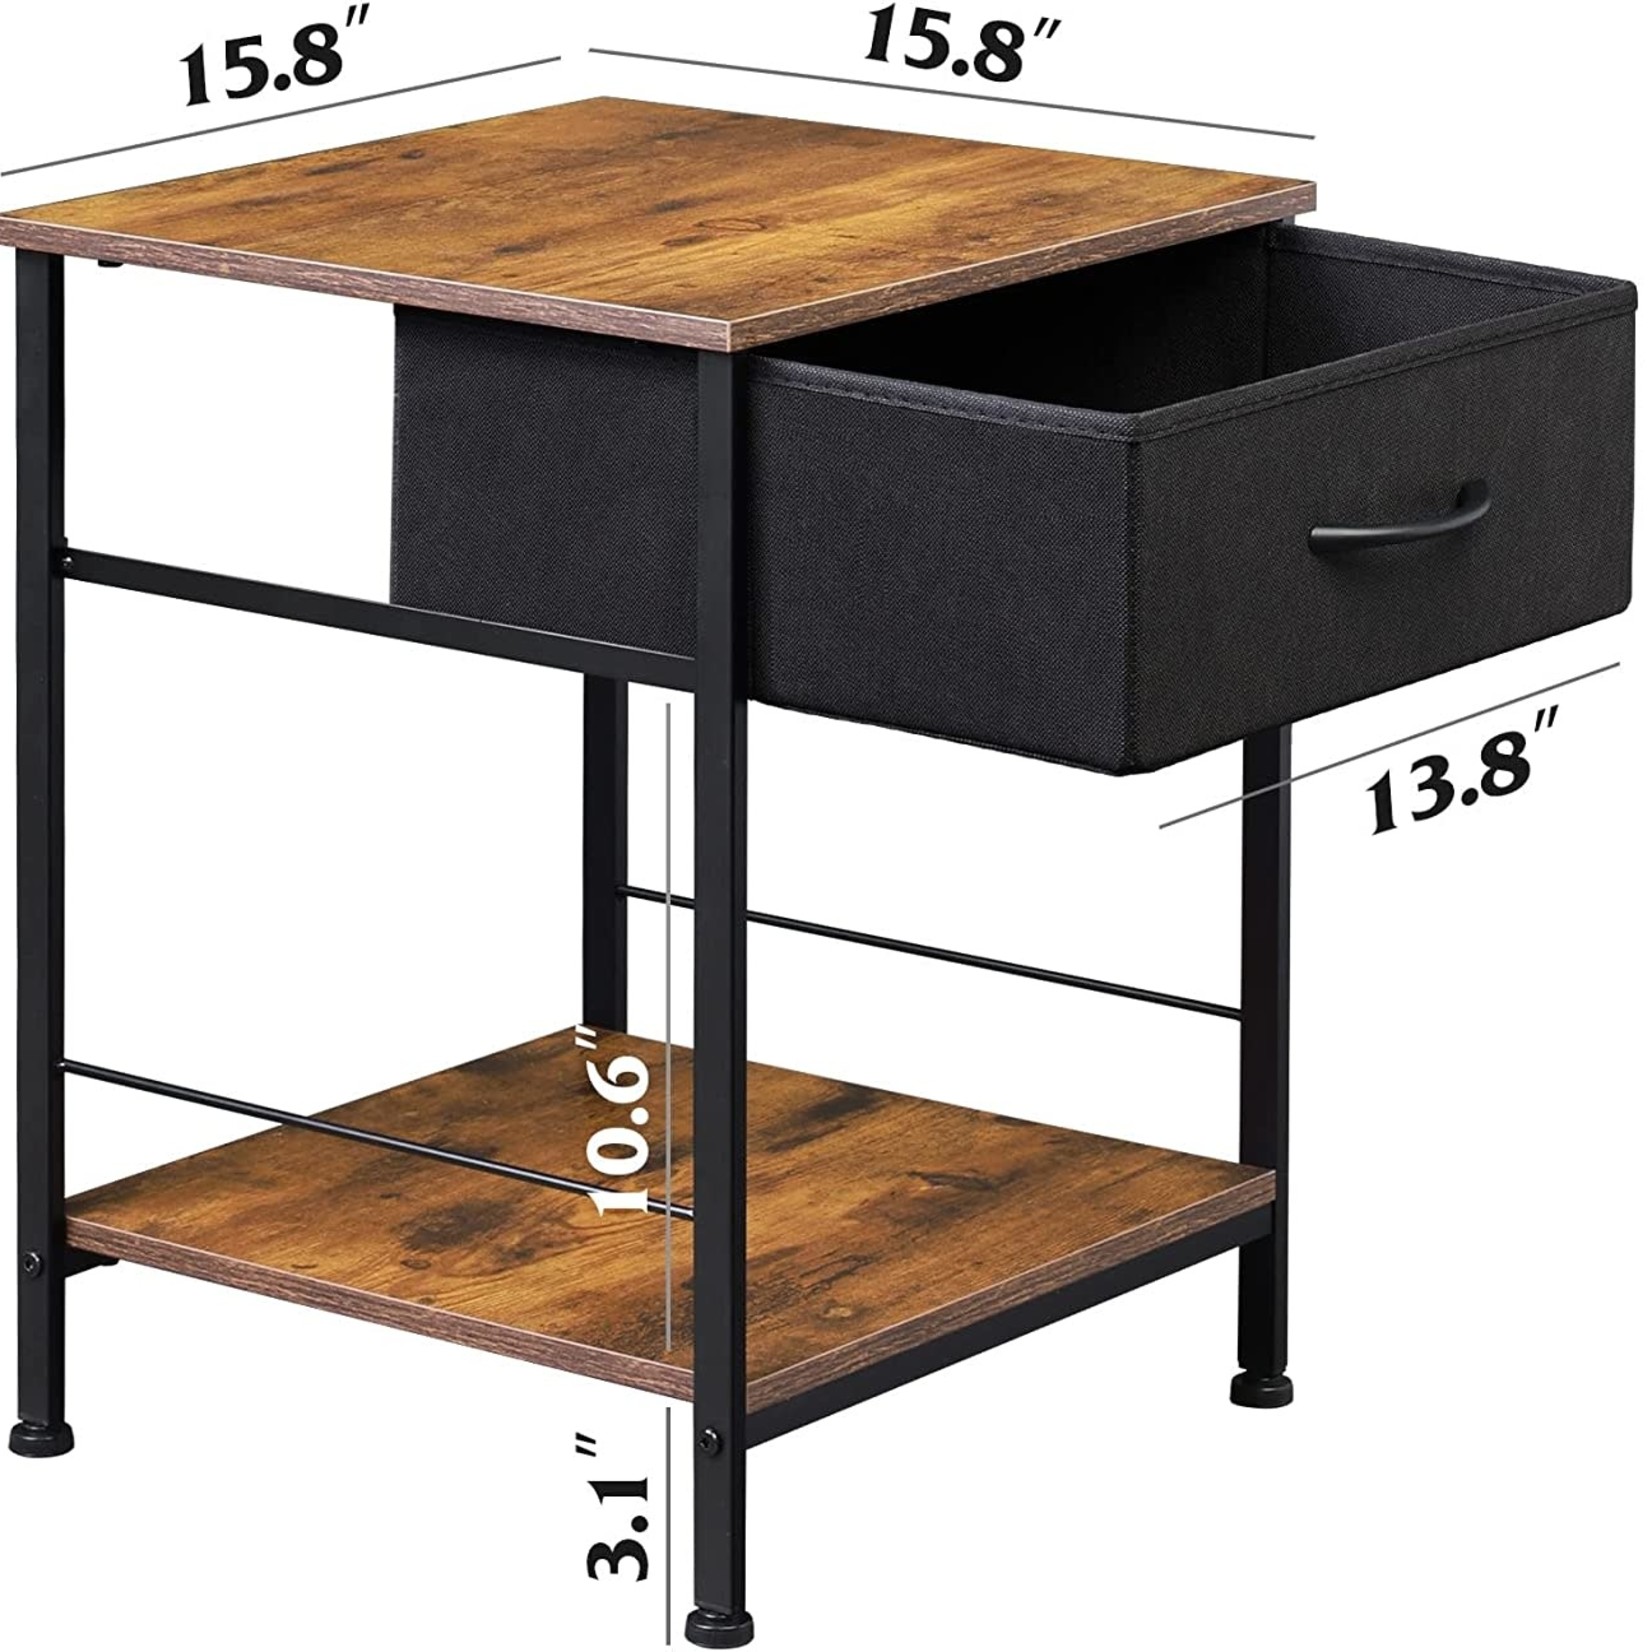 Wlive End Table with Fabric Storage Drawer